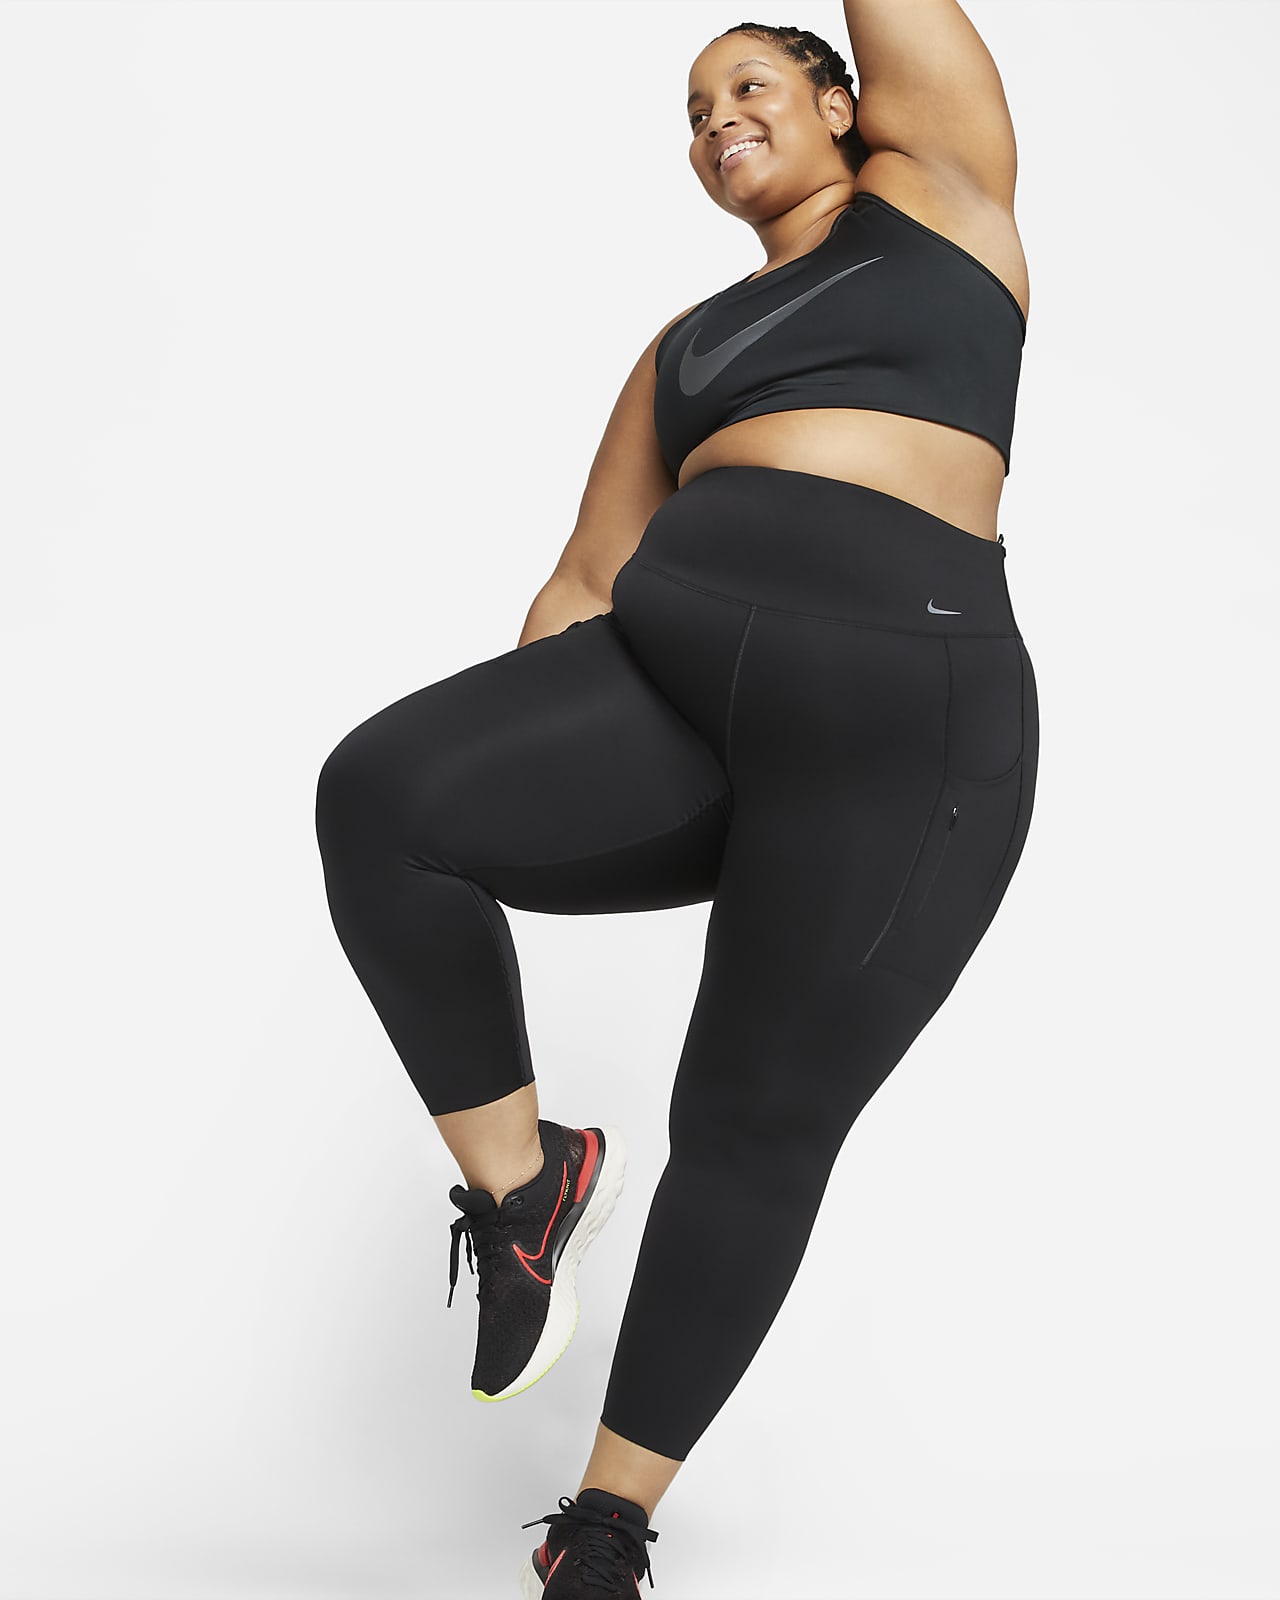 Nike Go Women's Firm-Support High-Waisted Leggings Pockets (Plus Size). Nike.com